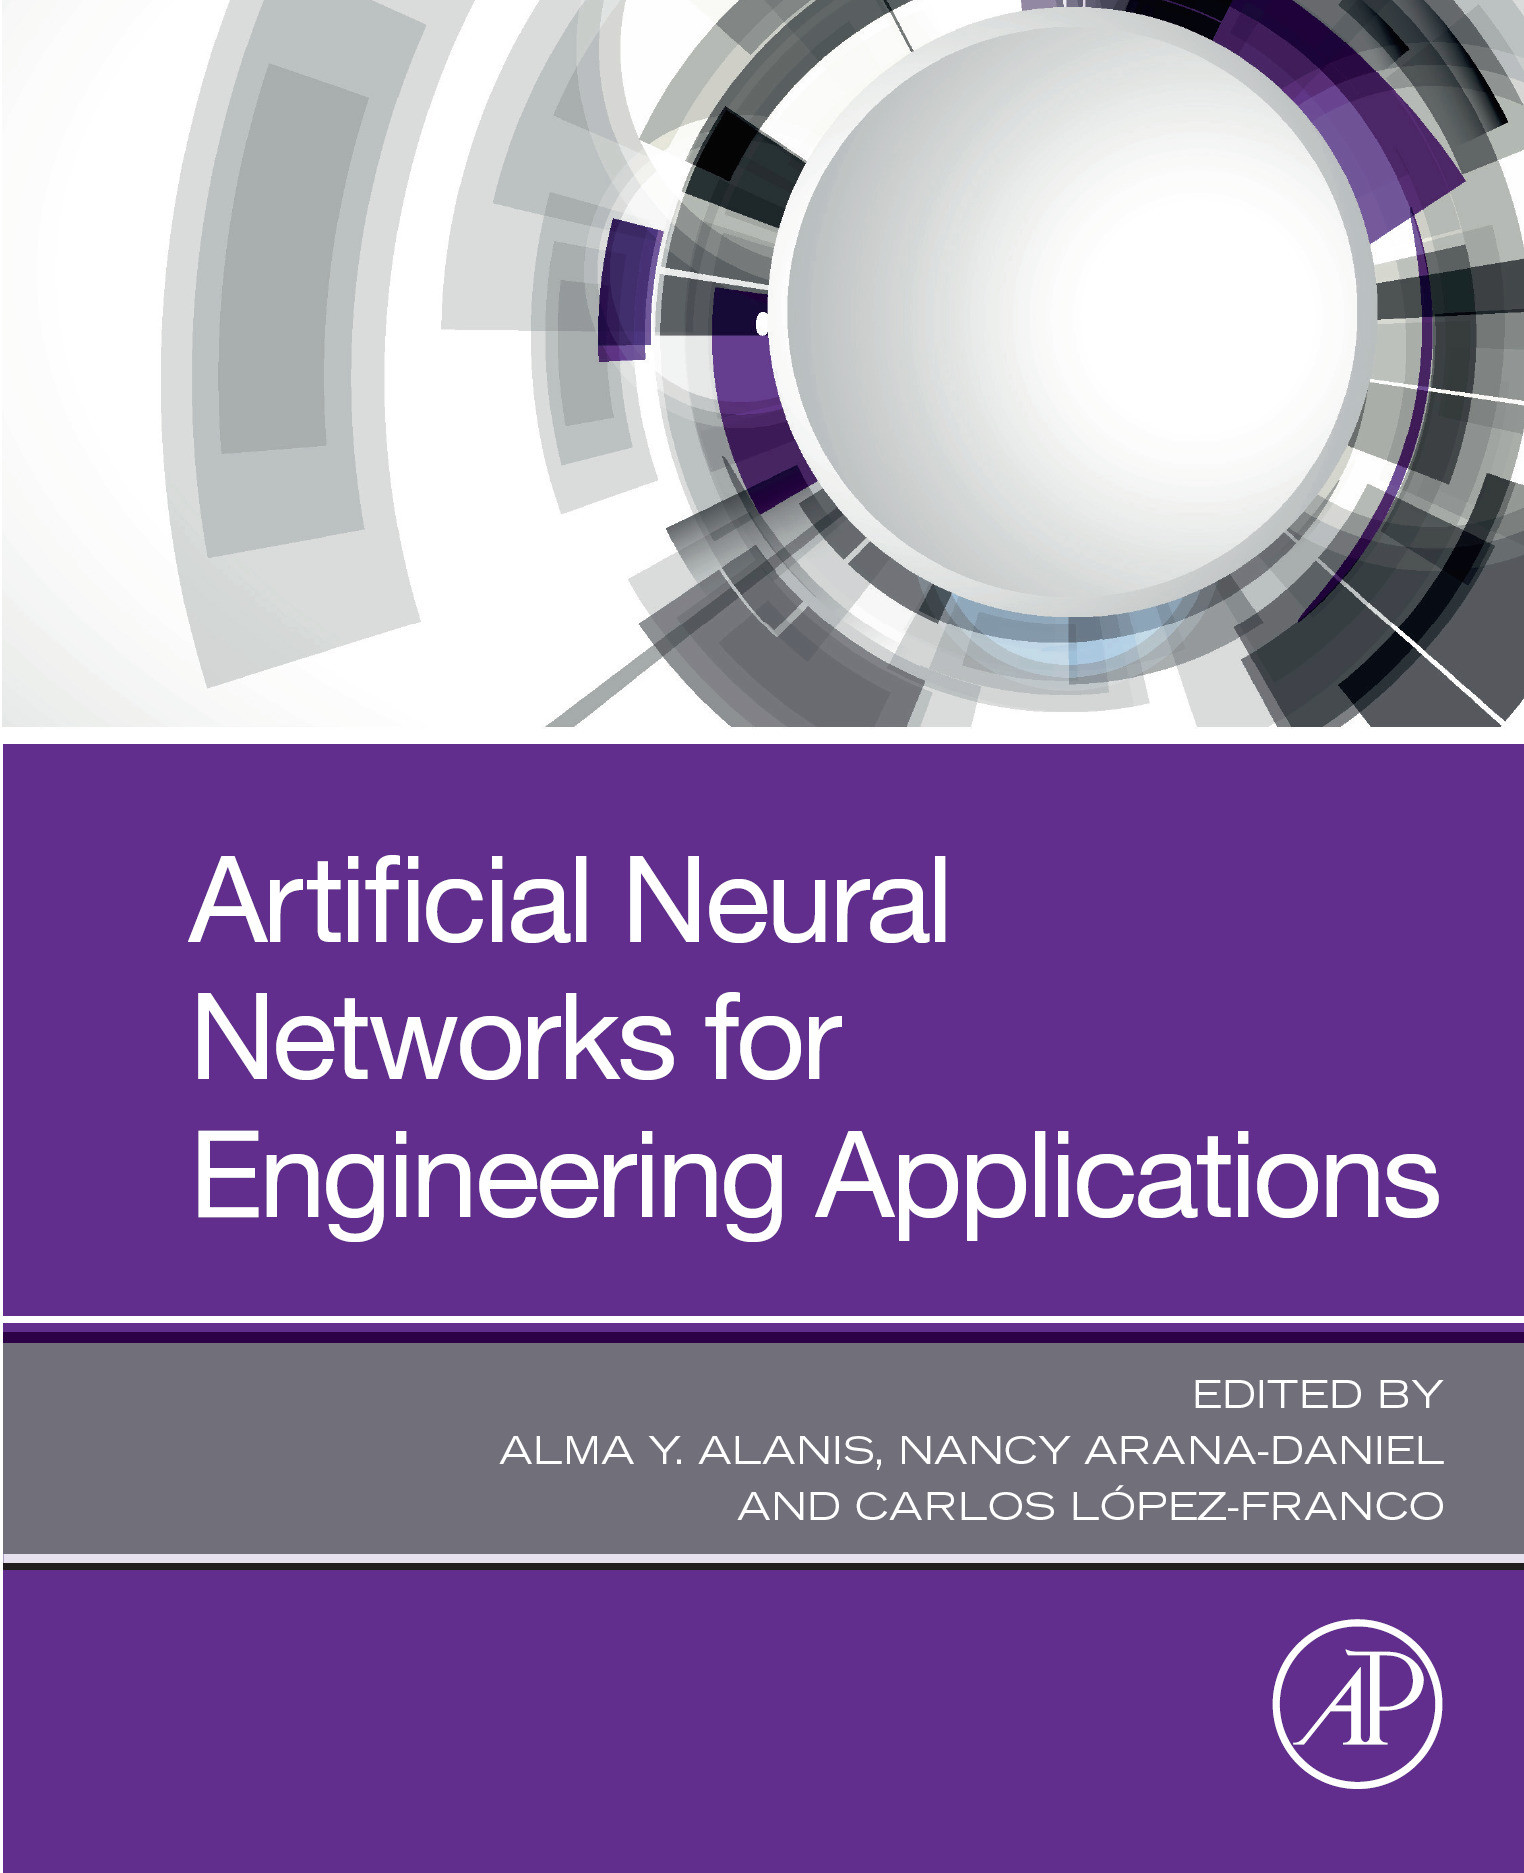 Artificial Neural Networks for Engineering Applications